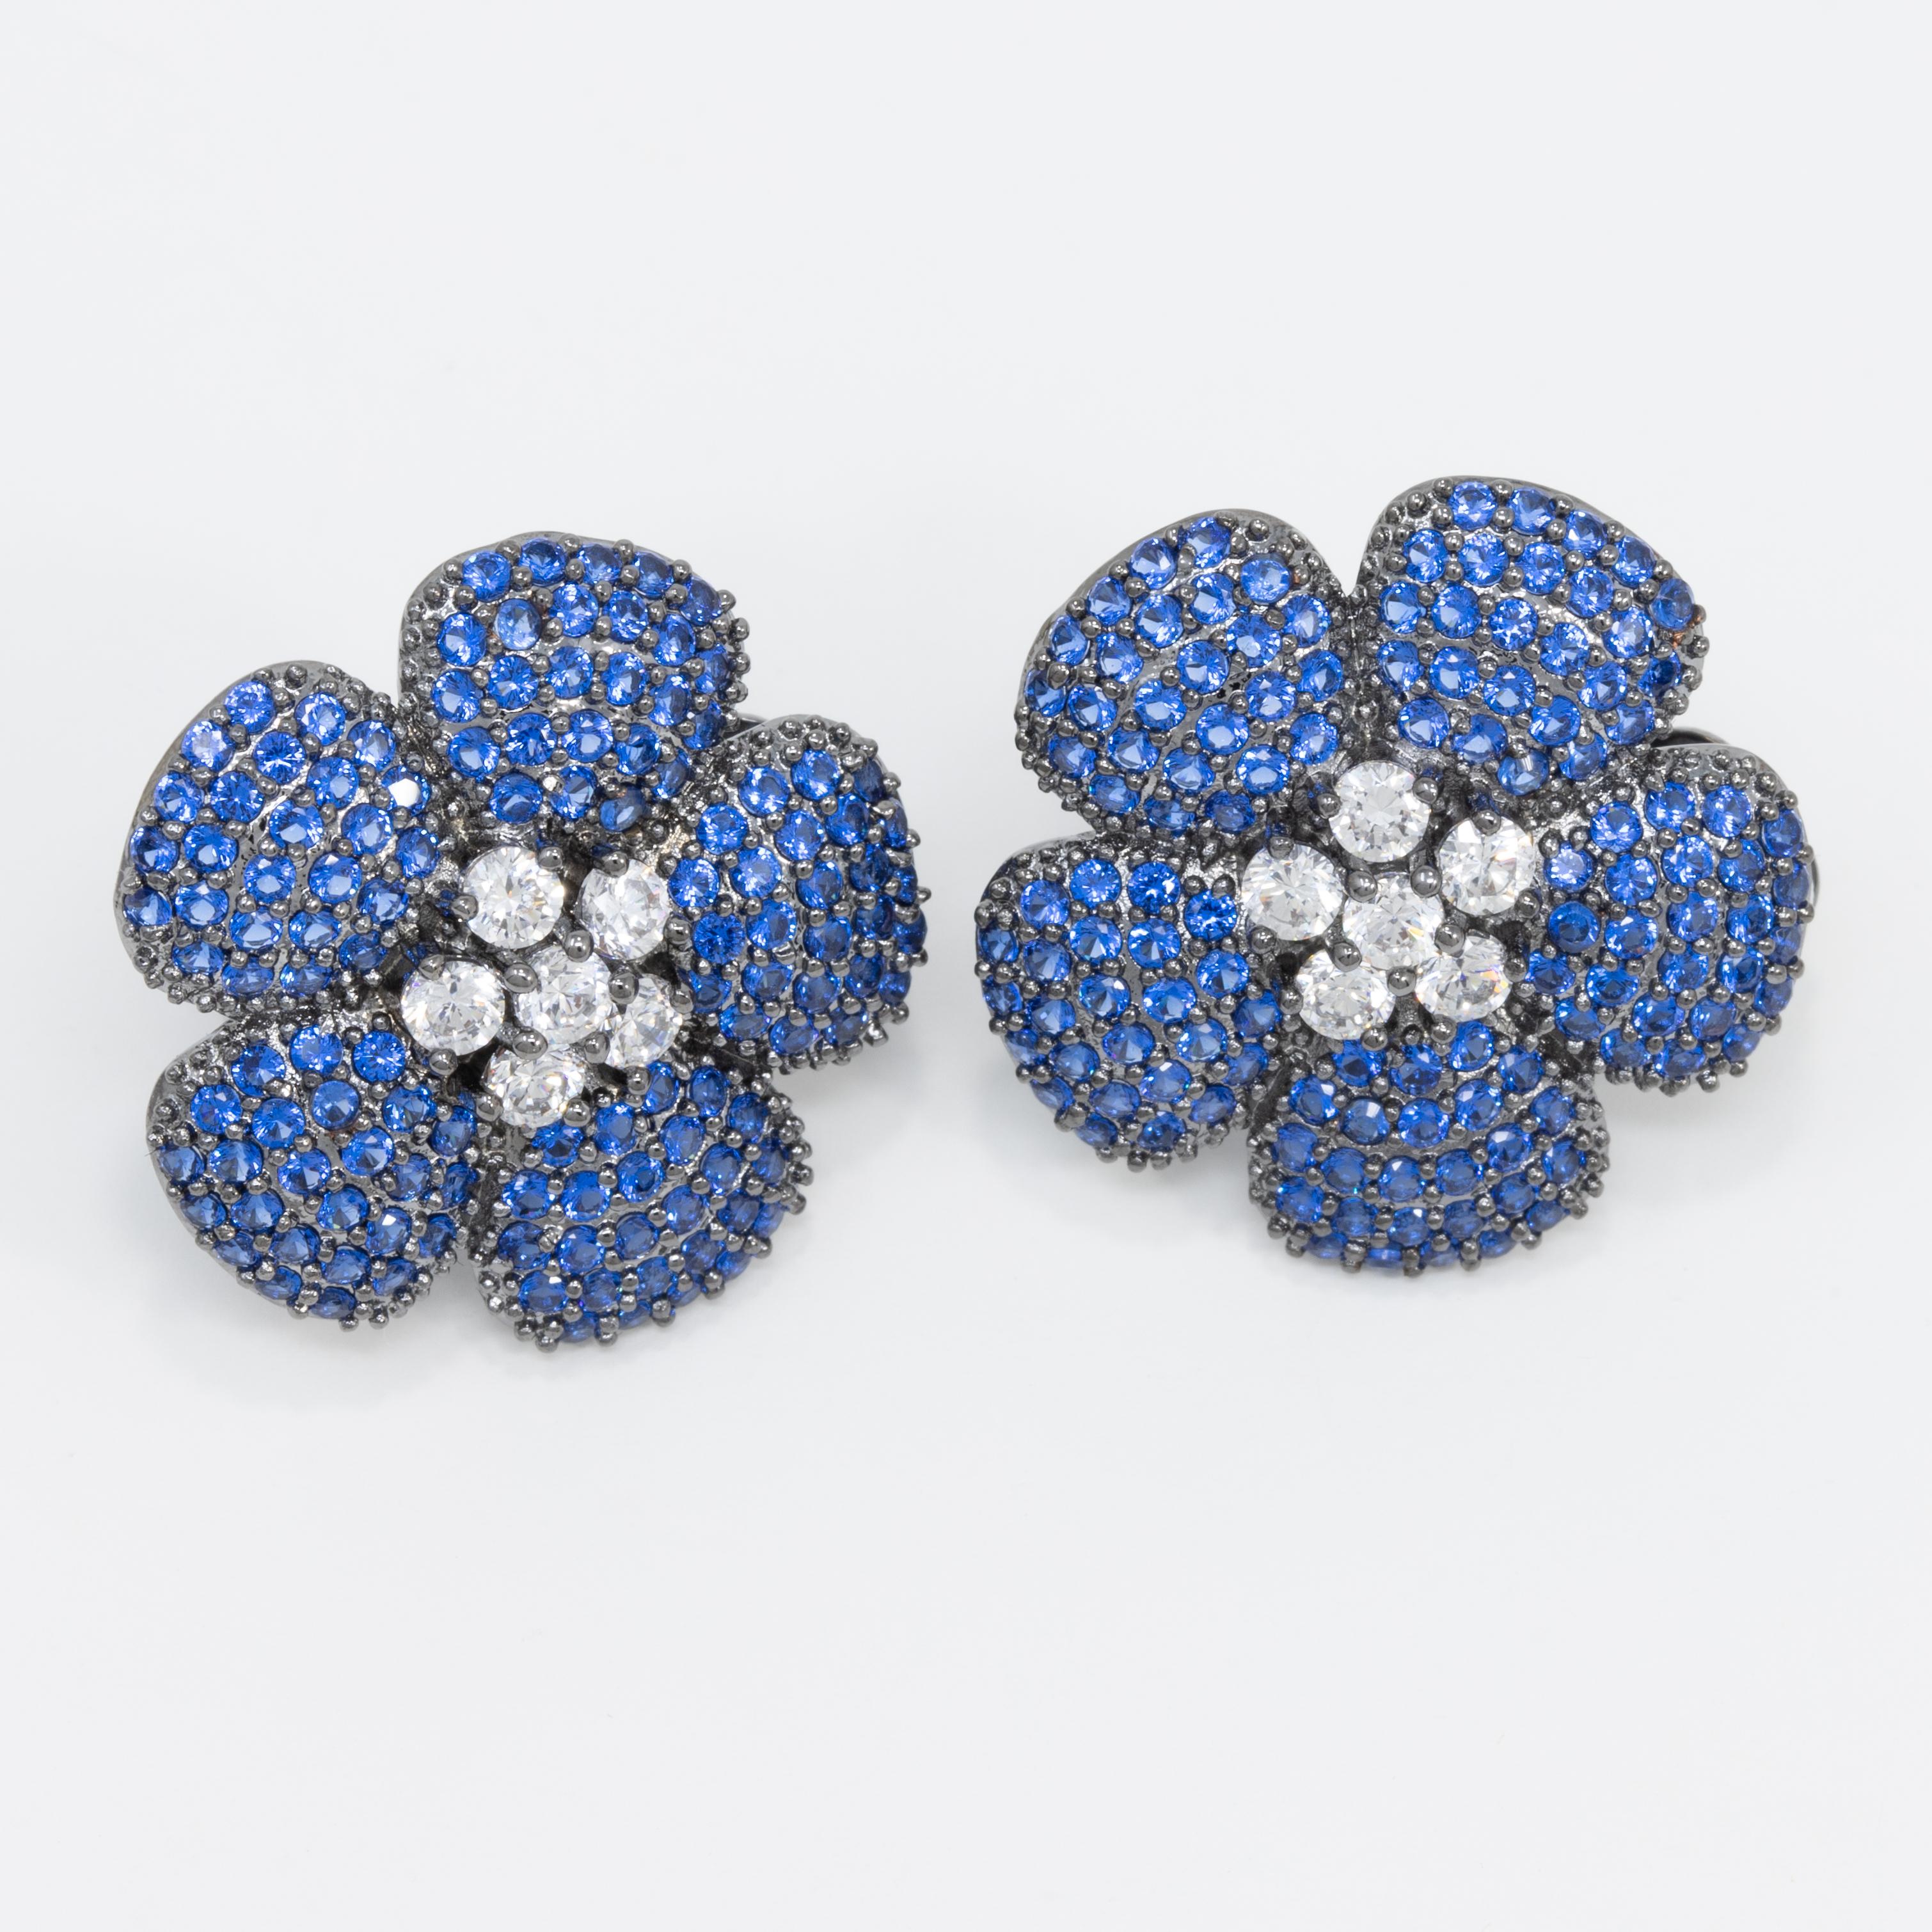 A pair of glittering flower button clip on earrings by Kenneth Jay Lane. Clear and dark-sapphire cubic zirconia crystals add a sparkling flair these stylish clips!

Dark gunmetal tone. Cubic zirconia crystals.

CZ by Kenneth Jay Lane